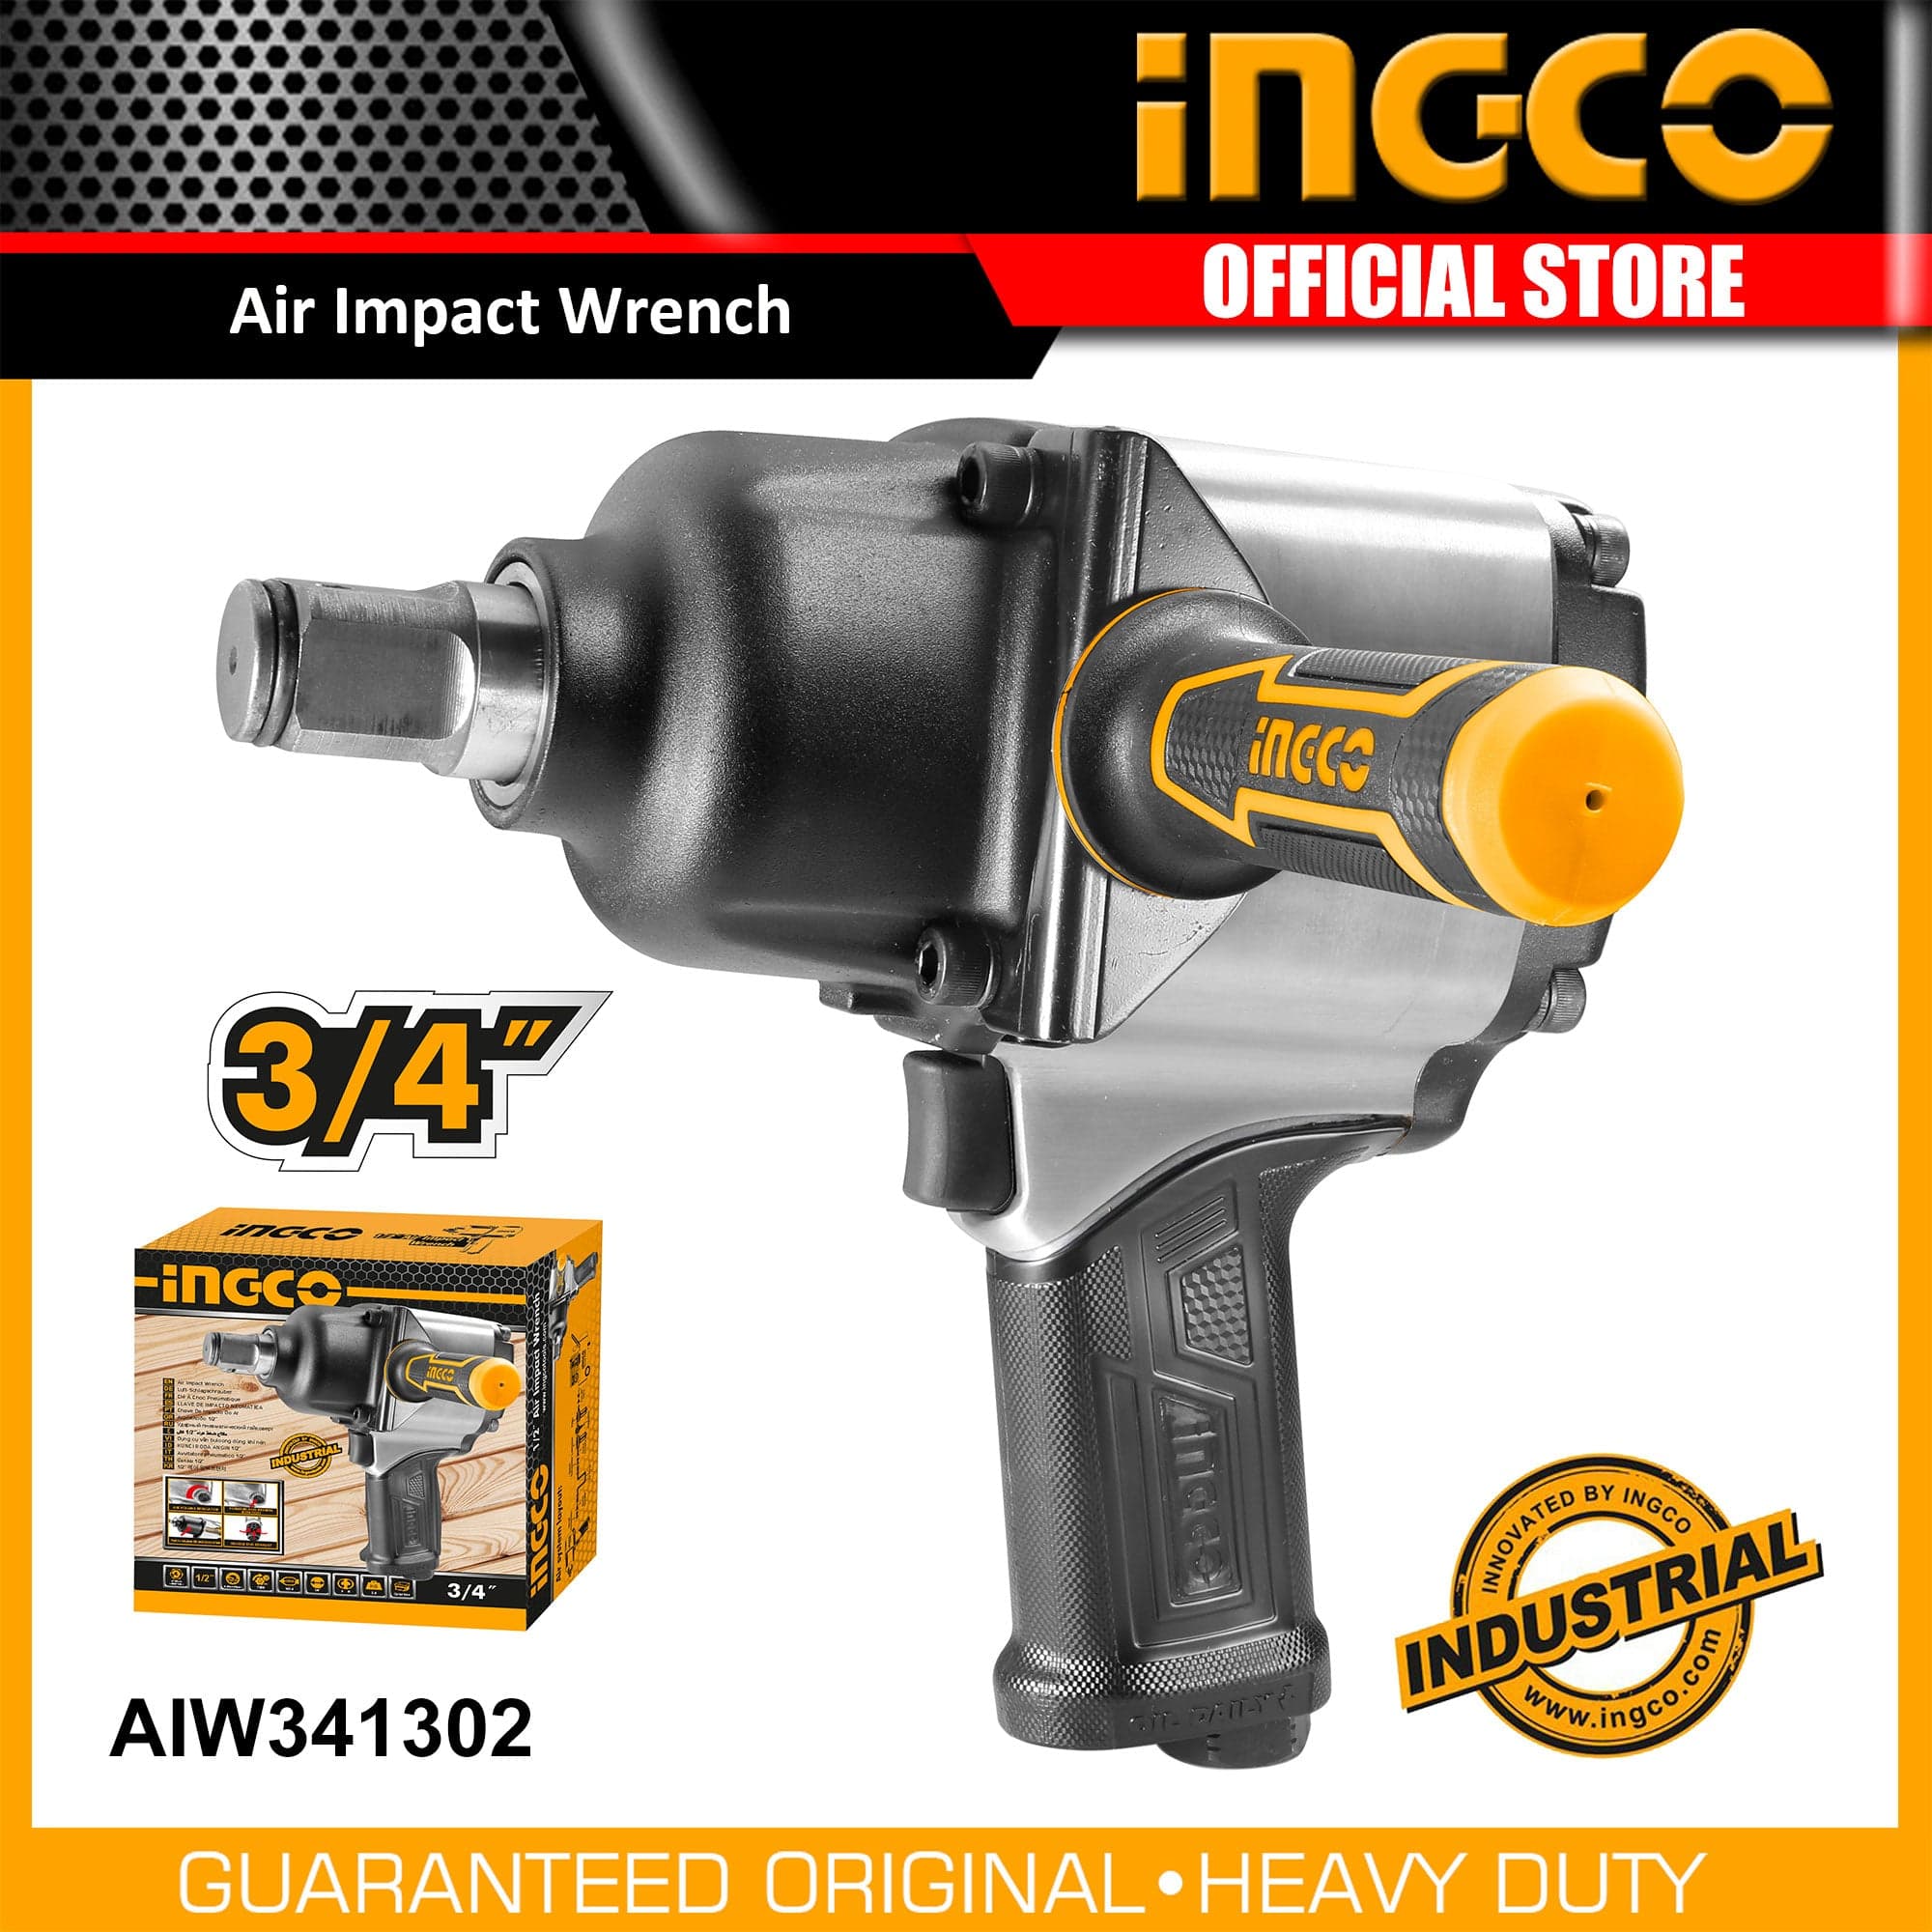 Ingco 3/4″ Air Impact Wrench - AIW341302 | Supply Master | Accra, Ghana Impact Wrench & Driver Buy Tools hardware Building materials